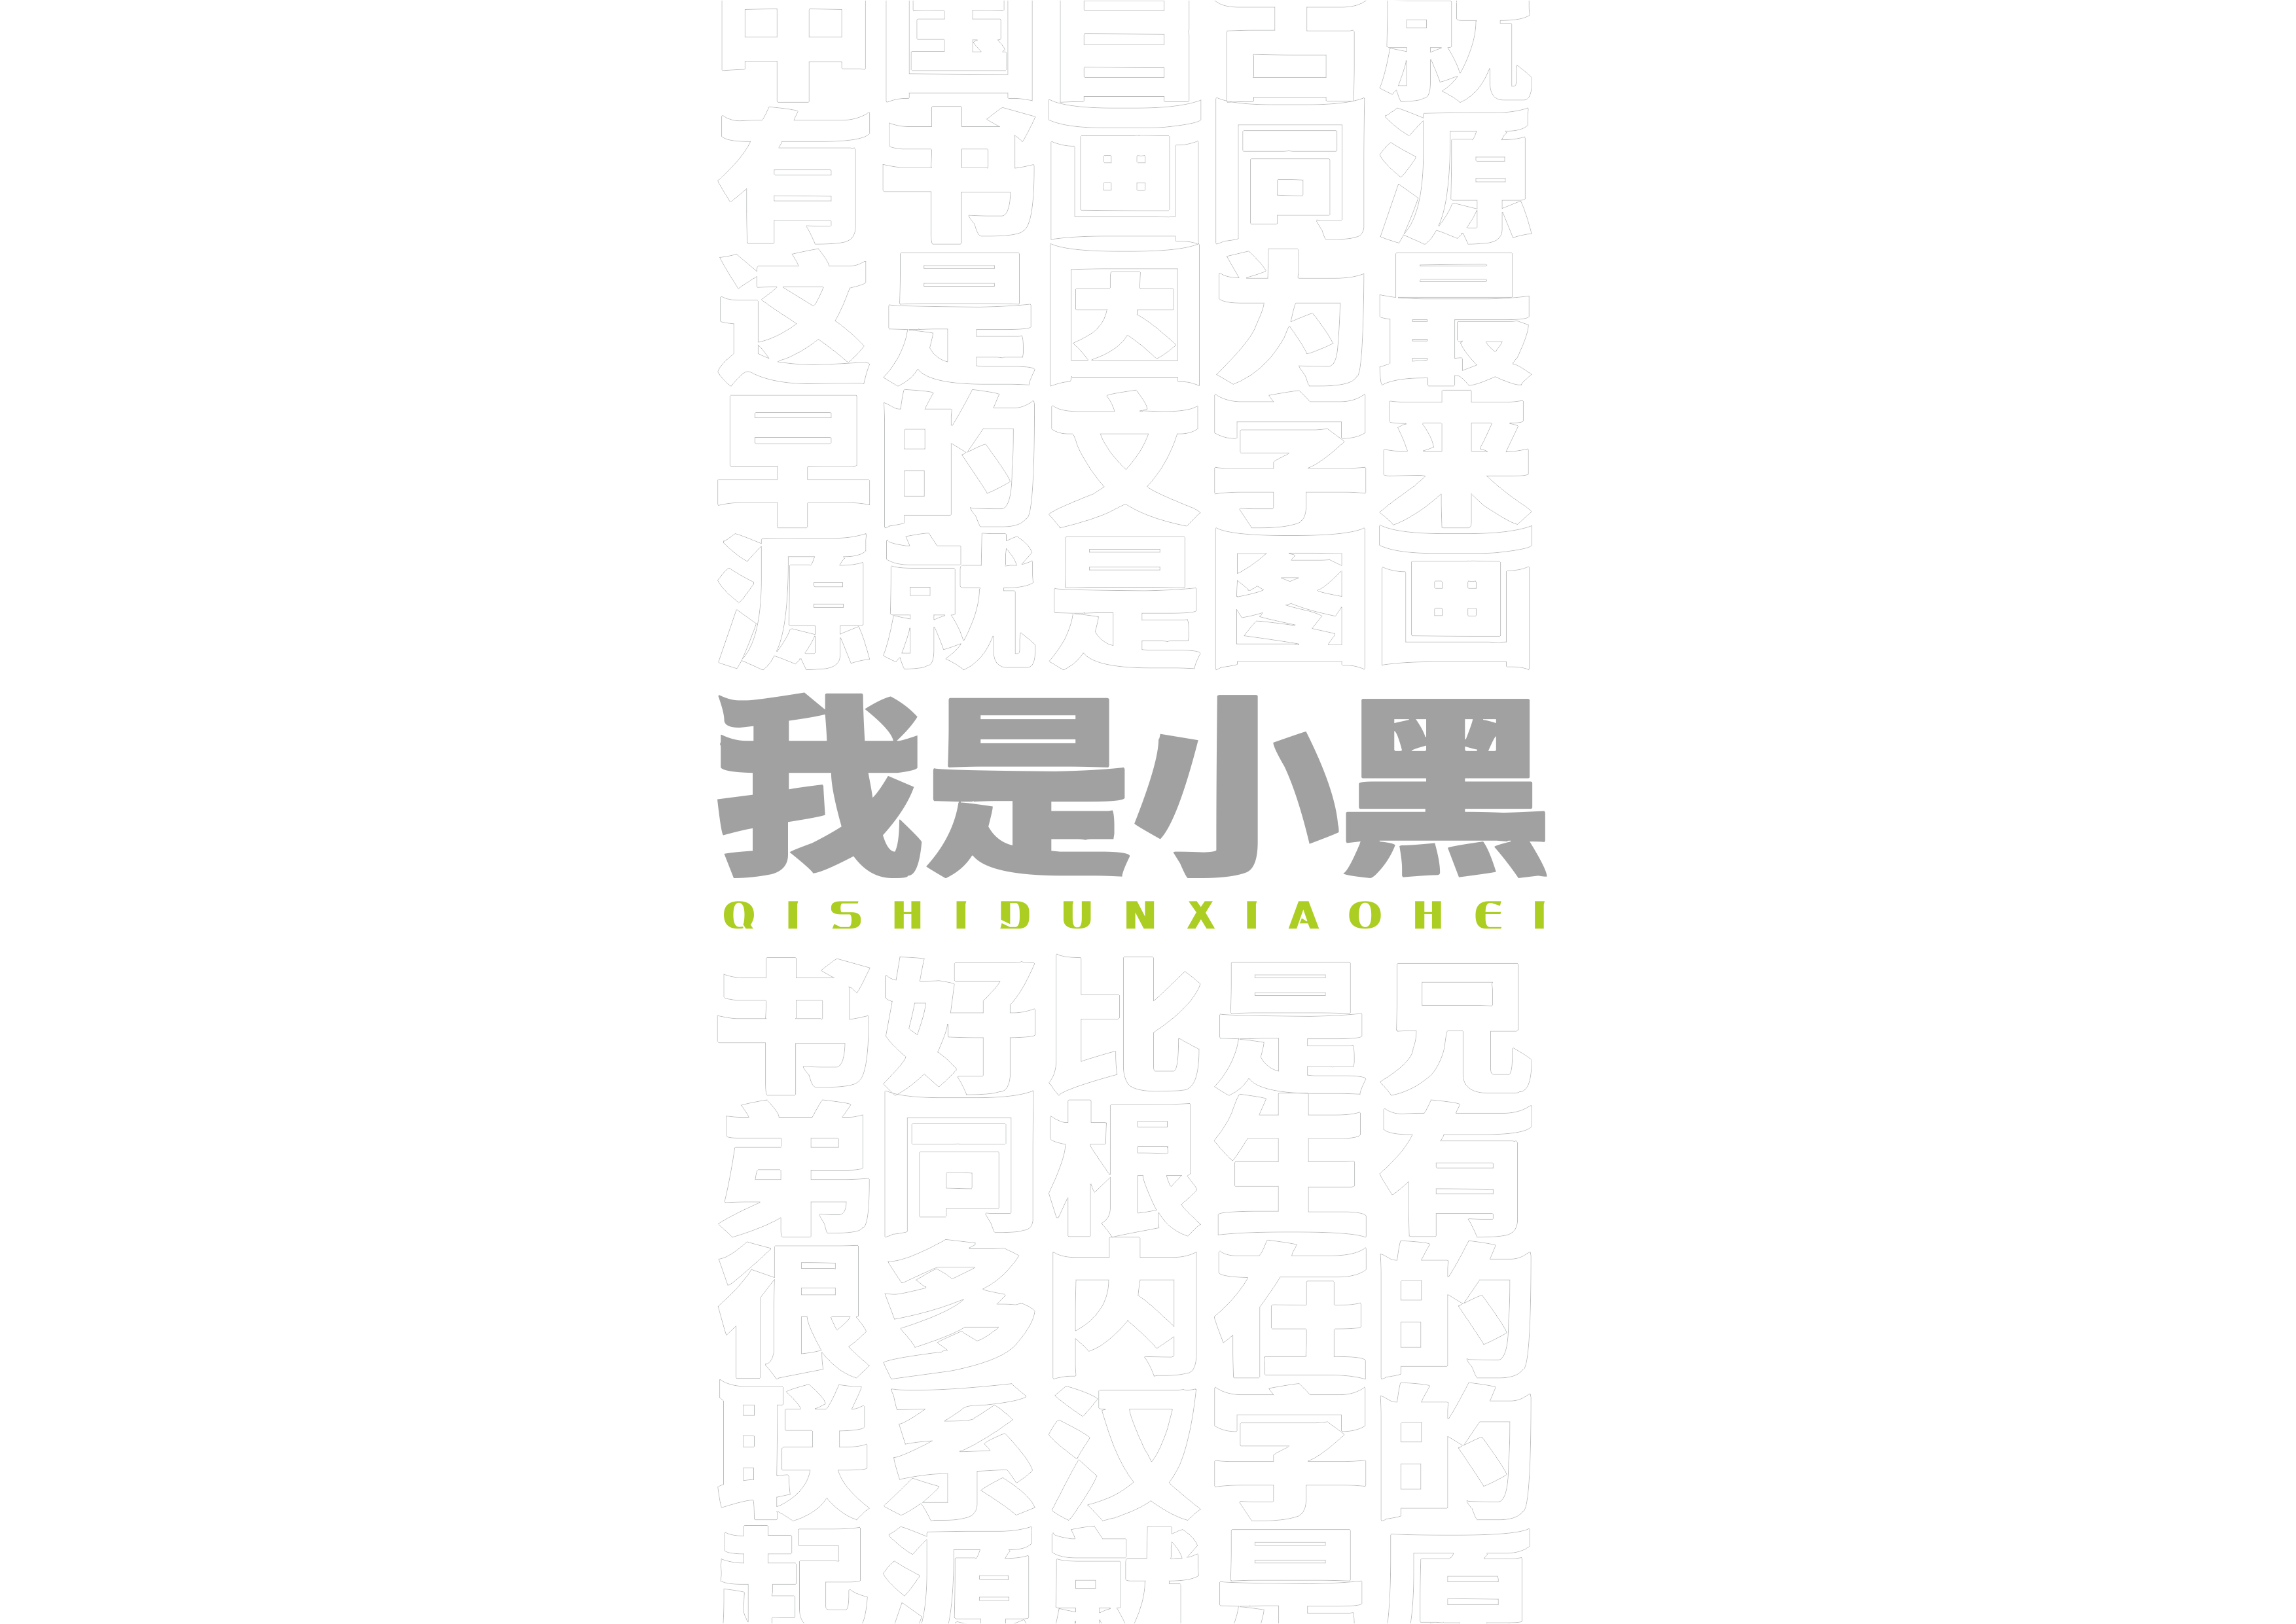 91P Collection of the latest Chinese font design schemes in 2021 #.58